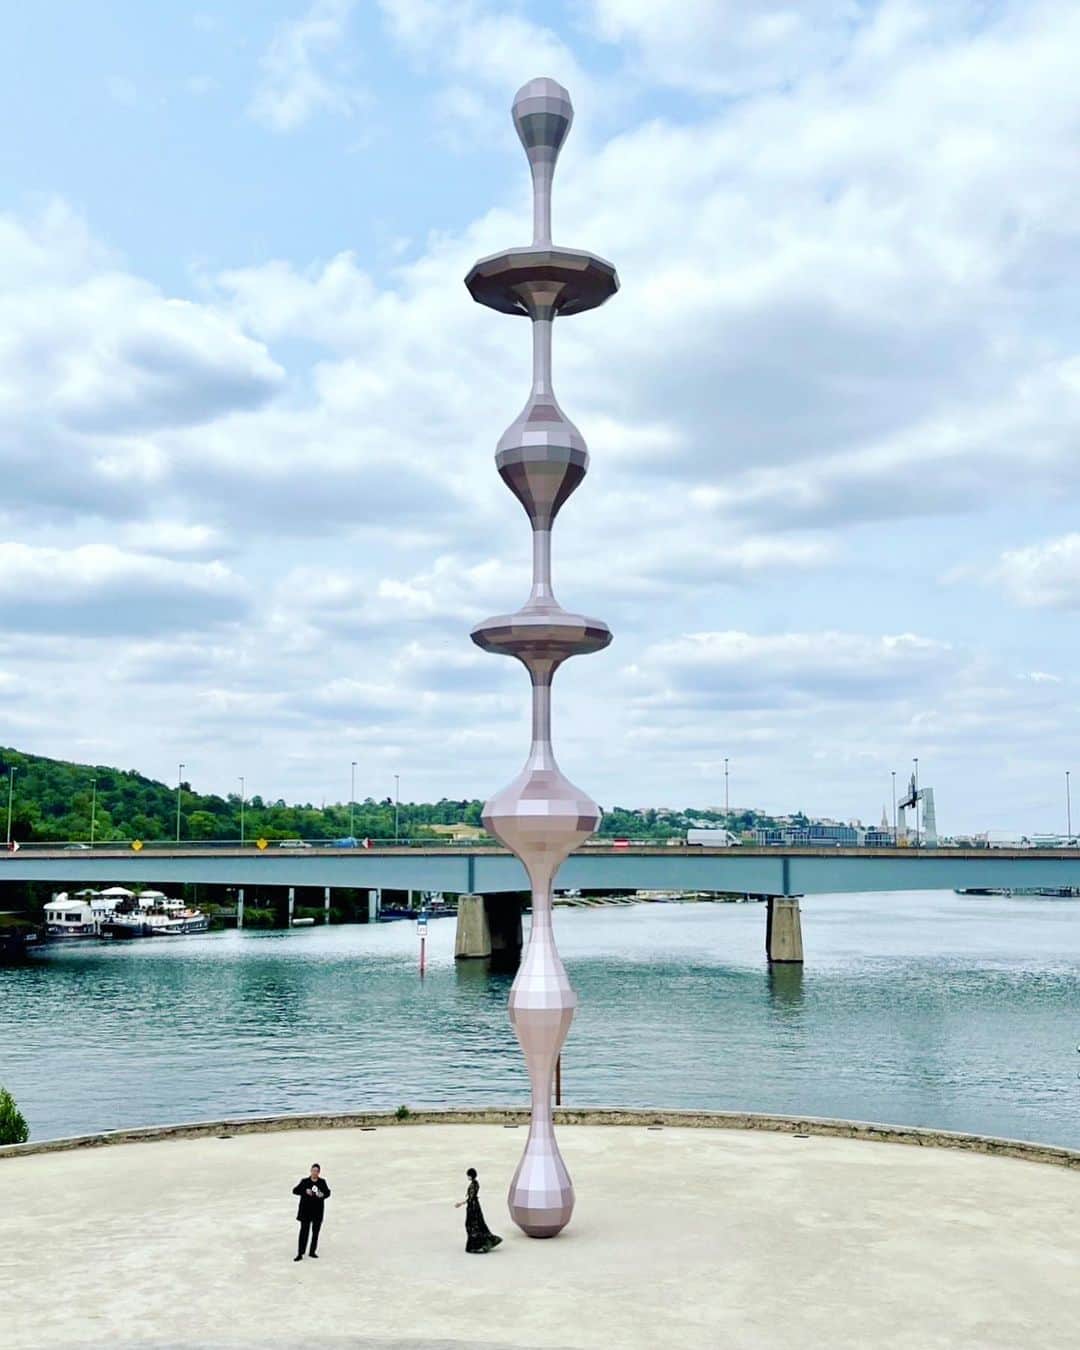 清川あさみさんのインスタグラム写真 - (清川あさみInstagram)「PARIS.🇫🇷  My husband Kohei 's largest ever sculpture "Ether (Equality) We were there for a short while to attend the unveiling of the sculpture on the Seine River in France .  It took long time since Kohei started to realize this project. Thank you for your hard work. This work, with its universal motifs of water and gravity, seems to balance various problems in the world.  We will definitely visit the Louvre and other places with our family again. Next time I will bring my children and visit again after a long time.  Next month, I will be unveiling a public art of mine in Japan. I am looking forward to it.  Ether (Equality) is to be unveiled soon.  Courtesy of SCAI THE BATHHOUSE and Pace Gallery @scaithebathhouse @pacegallery   フランス・パリ近郊のセーヌ川の中州、セガン島の先端に位置するモニュメントとして夫の大型彫刻作品が完成し公開式典が28日開かれ参加してきました。  沢山のパリの関係者や沢山の友人も来てくださり素敵な時間になりました。  「Ether（Equality)」は世界の様々な問題のバランスをとっているかのようでした。  この話が来てから実現するまで時間がかかったので、無事に完成してよかったです。  お疲れ様でございました！  ルーヴルでの発表以来のparisで、その時はお腹に次男がいて、長男が二歳頃だったのですが、深い思い出が沢山ある場所です。弾丸でしかたがまた家族で必ず訪れる場所が増えました。次回は子供達も連れて久々に来ようと思います。  実は来月は私も日本で大きなパブリック作品がお披露目されます。こちらも楽しみ。  with @hautsdeseine and @danae.io #koheinawa @nawa_kohei  #名和晃平 #ileseguin #hautsdeseine #seinedepartment #asamikiyokawa #セーヌ川 #パブリックアート」6月30日 19時17分 - asami_kiyokawa